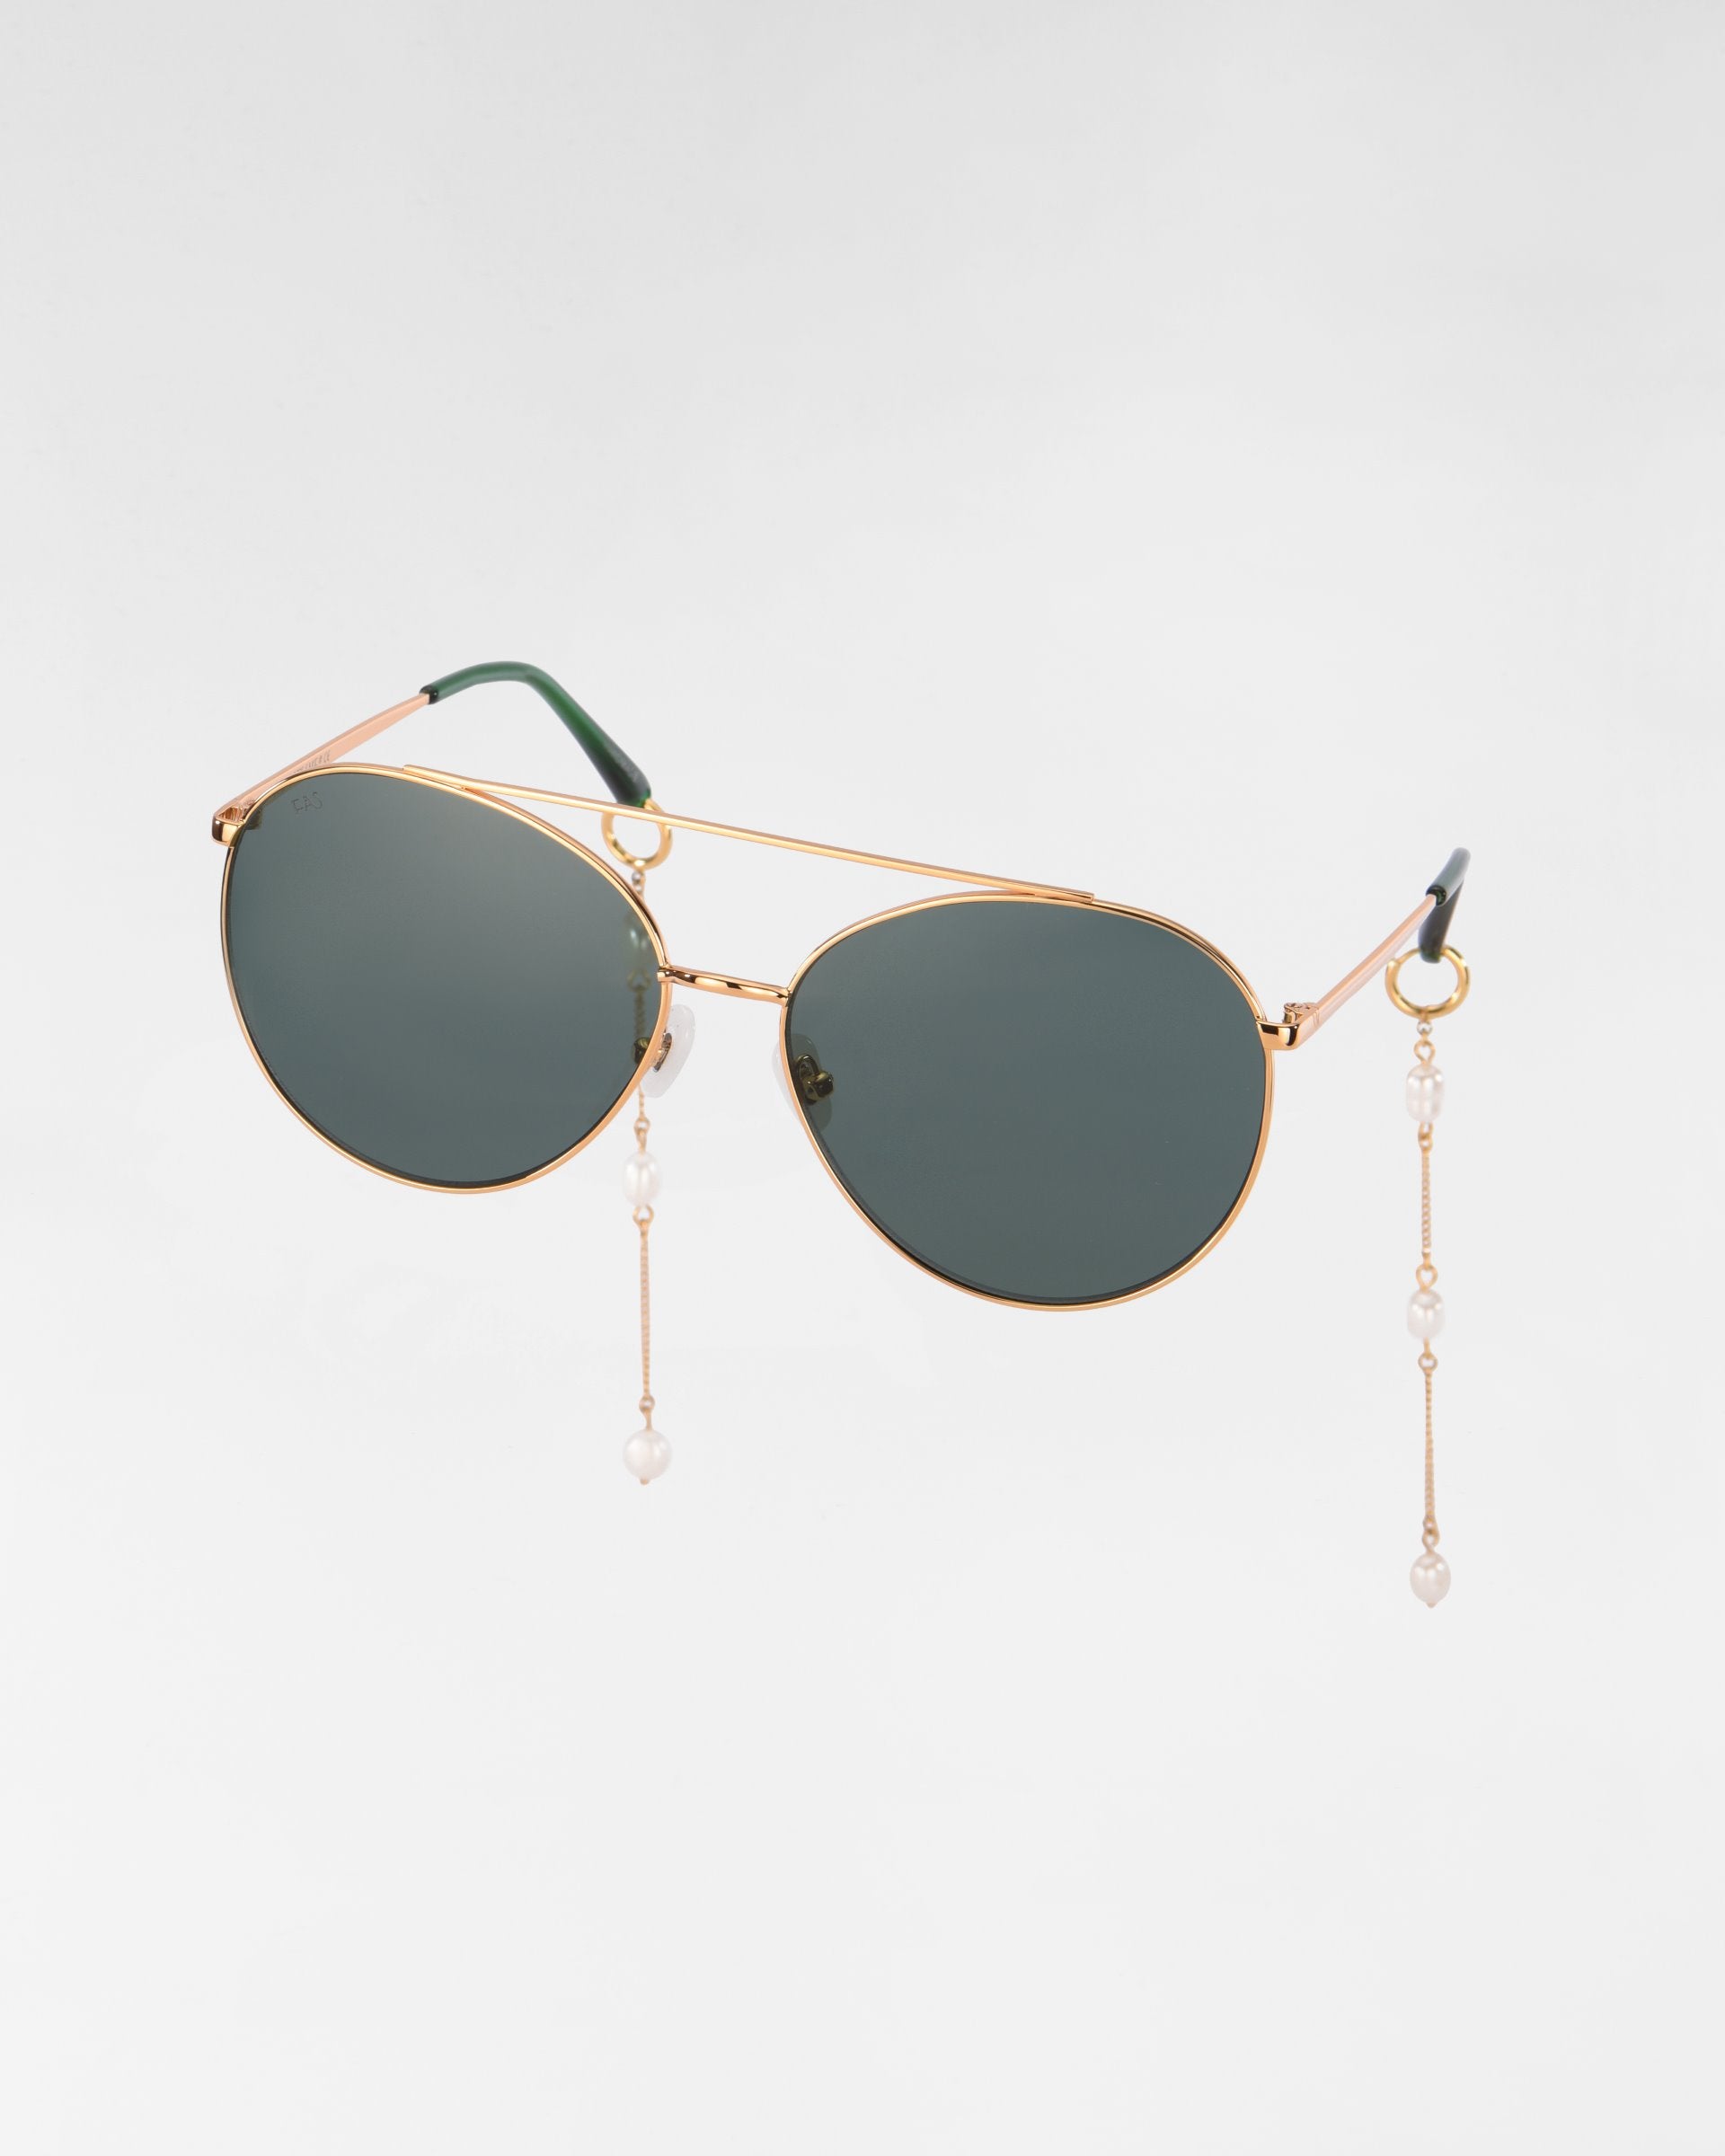 A pair of Yoyo sunglasses by For Art&#39;s Sake® with dark lenses and 18k gold-plated frames. The sunglasses feature decorative chains with small freshwater pearls hanging from the temples. The background is plain white.